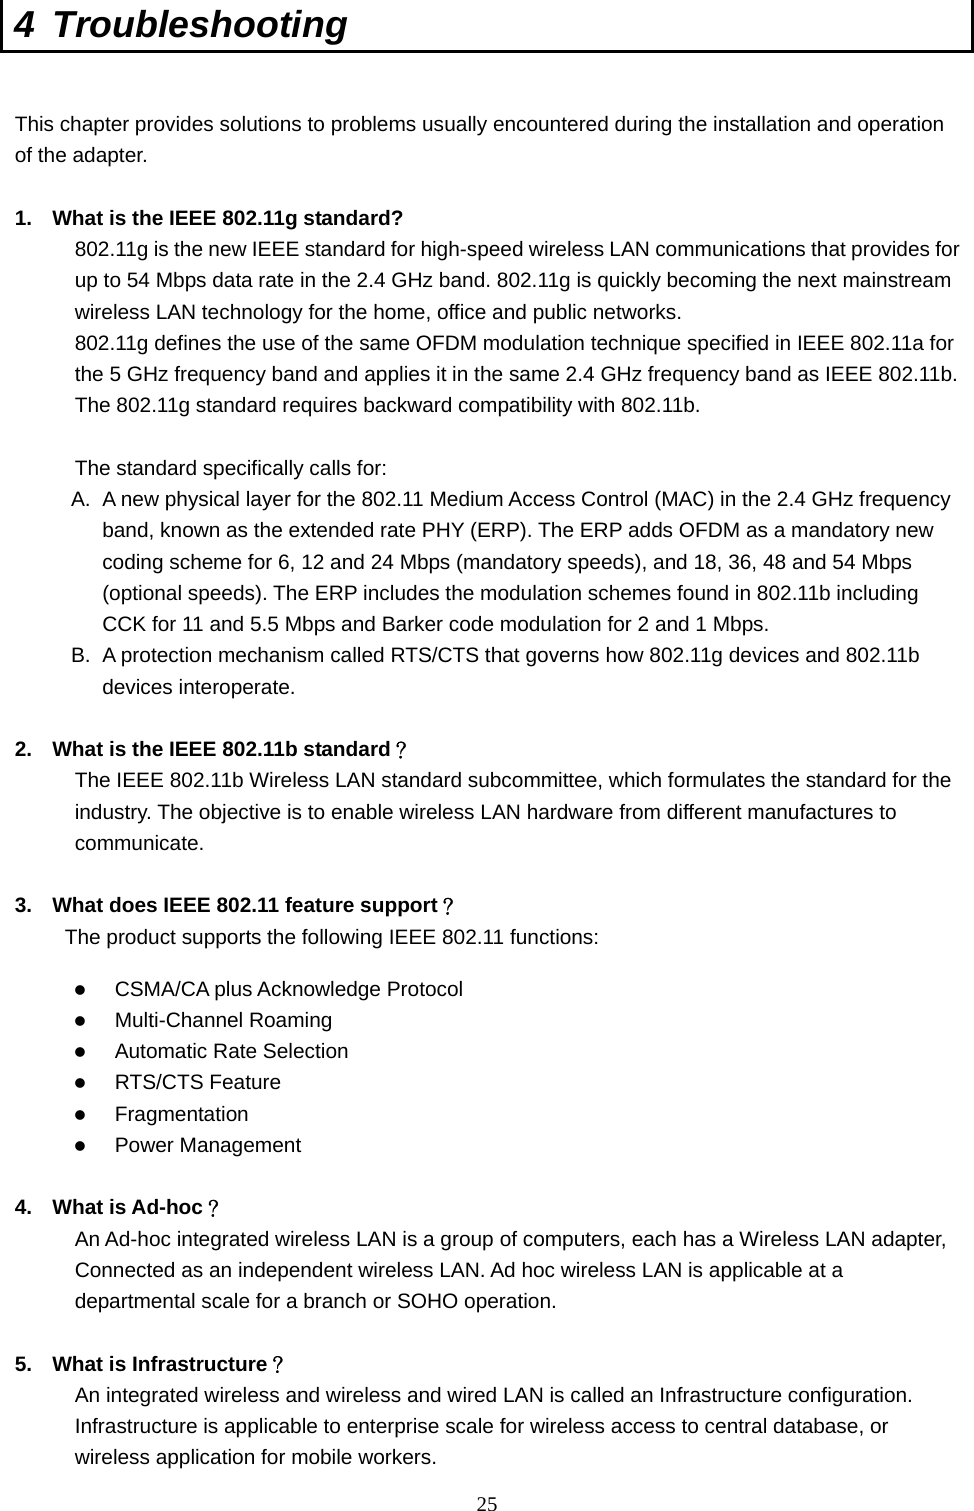  25 4 Troubleshooting  This chapter provides solutions to problems usually encountered during the installation and operation of the adapter.    1.  What is the IEEE 802.11g standard? 802.11g is the new IEEE standard for high-speed wireless LAN communications that provides for up to 54 Mbps data rate in the 2.4 GHz band. 802.11g is quickly becoming the next mainstream wireless LAN technology for the home, office and public networks.   802.11g defines the use of the same OFDM modulation technique specified in IEEE 802.11a for the 5 GHz frequency band and applies it in the same 2.4 GHz frequency band as IEEE 802.11b. The 802.11g standard requires backward compatibility with 802.11b.  The standard specifically calls for:   A.  A new physical layer for the 802.11 Medium Access Control (MAC) in the 2.4 GHz frequency band, known as the extended rate PHY (ERP). The ERP adds OFDM as a mandatory new coding scheme for 6, 12 and 24 Mbps (mandatory speeds), and 18, 36, 48 and 54 Mbps (optional speeds). The ERP includes the modulation schemes found in 802.11b including CCK for 11 and 5.5 Mbps and Barker code modulation for 2 and 1 Mbps. B.  A protection mechanism called RTS/CTS that governs how 802.11g devices and 802.11b devices interoperate.  2.  What is the IEEE 802.11b standard？ The IEEE 802.11b Wireless LAN standard subcommittee, which formulates the standard for the industry. The objective is to enable wireless LAN hardware from different manufactures to communicate.  3.  What does IEEE 802.11 feature support？ The product supports the following IEEE 802.11 functions:   CSMA/CA plus Acknowledge Protocol   Multi-Channel Roaming   Automatic Rate Selection   RTS/CTS Feature   Fragmentation   Power Management  4. What is Ad-hoc？ An Ad-hoc integrated wireless LAN is a group of computers, each has a Wireless LAN adapter, Connected as an independent wireless LAN. Ad hoc wireless LAN is applicable at a departmental scale for a branch or SOHO operation.  5.  What is Infrastructure？ An integrated wireless and wireless and wired LAN is called an Infrastructure configuration. Infrastructure is applicable to enterprise scale for wireless access to central database, or wireless application for mobile workers. 